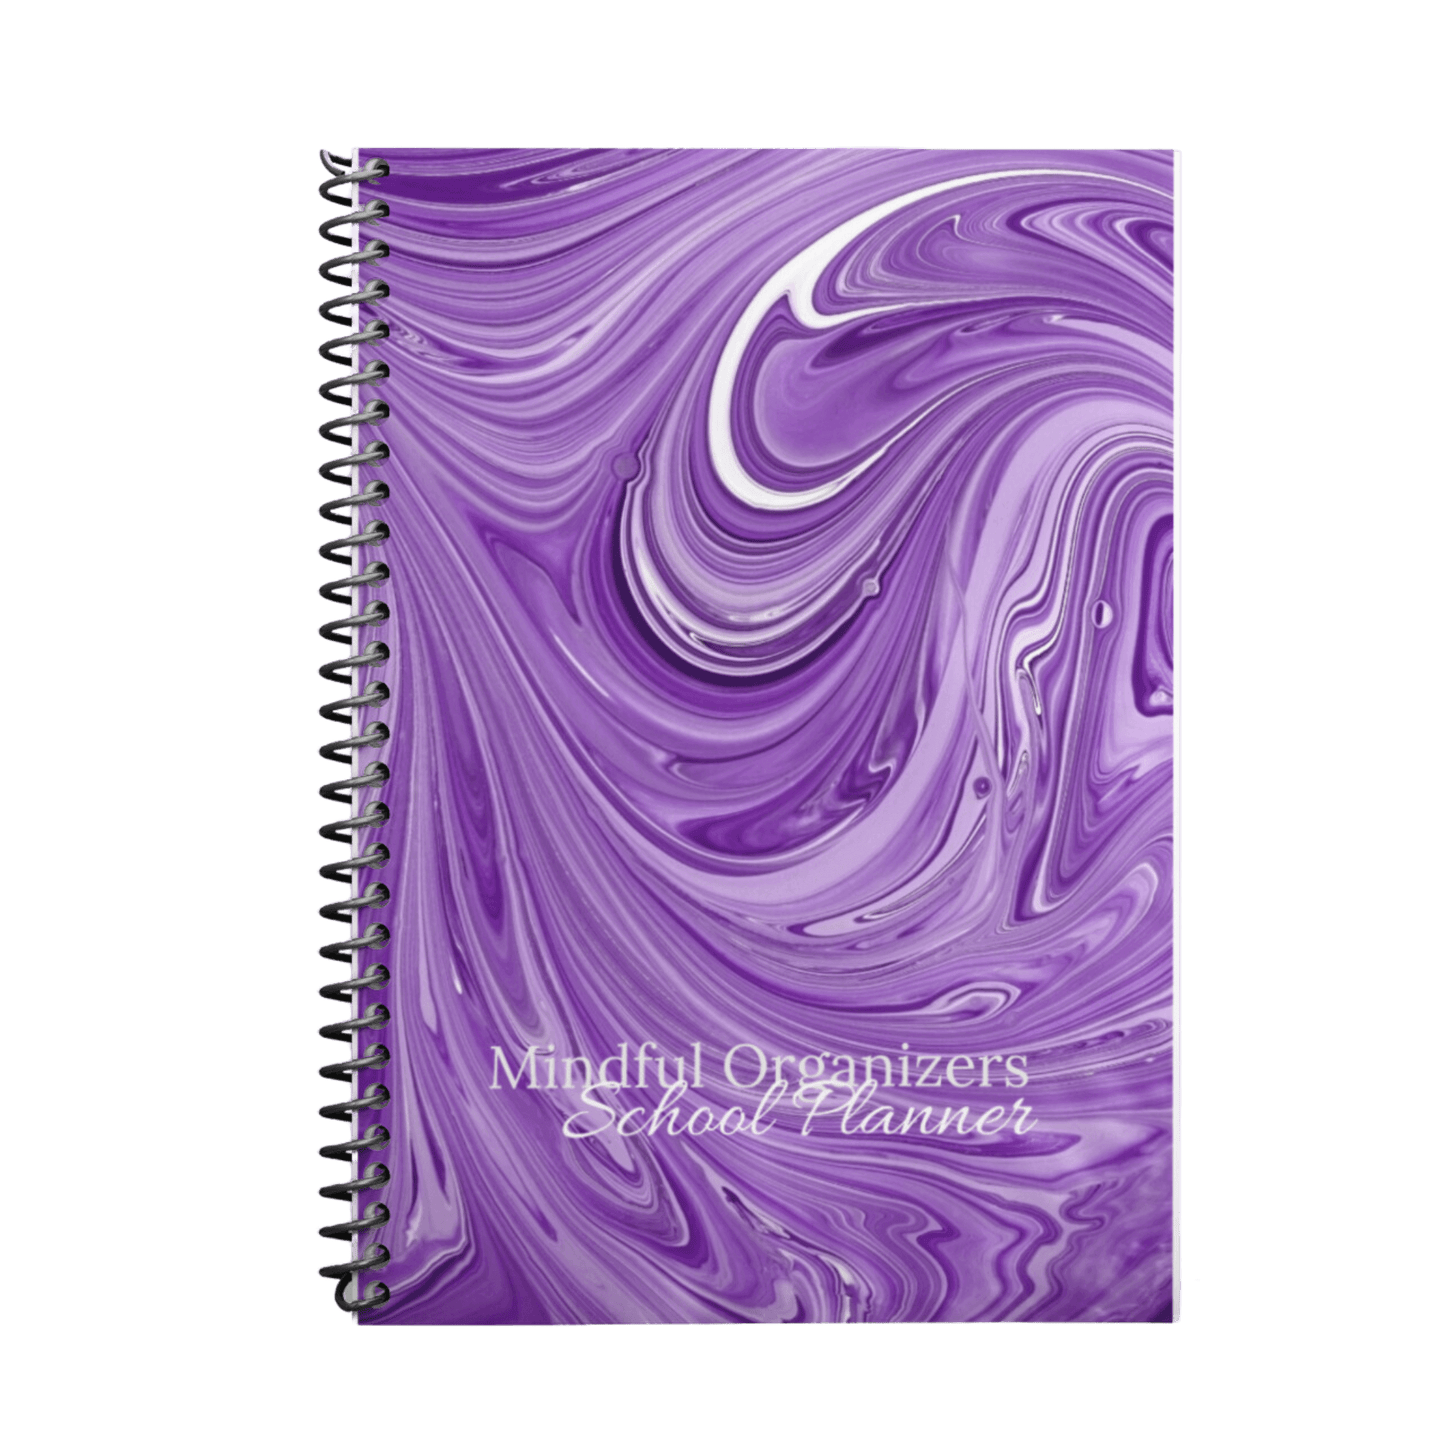 Image of Mindful Organizers School Planner from Mindful Organizers selling for $22.00